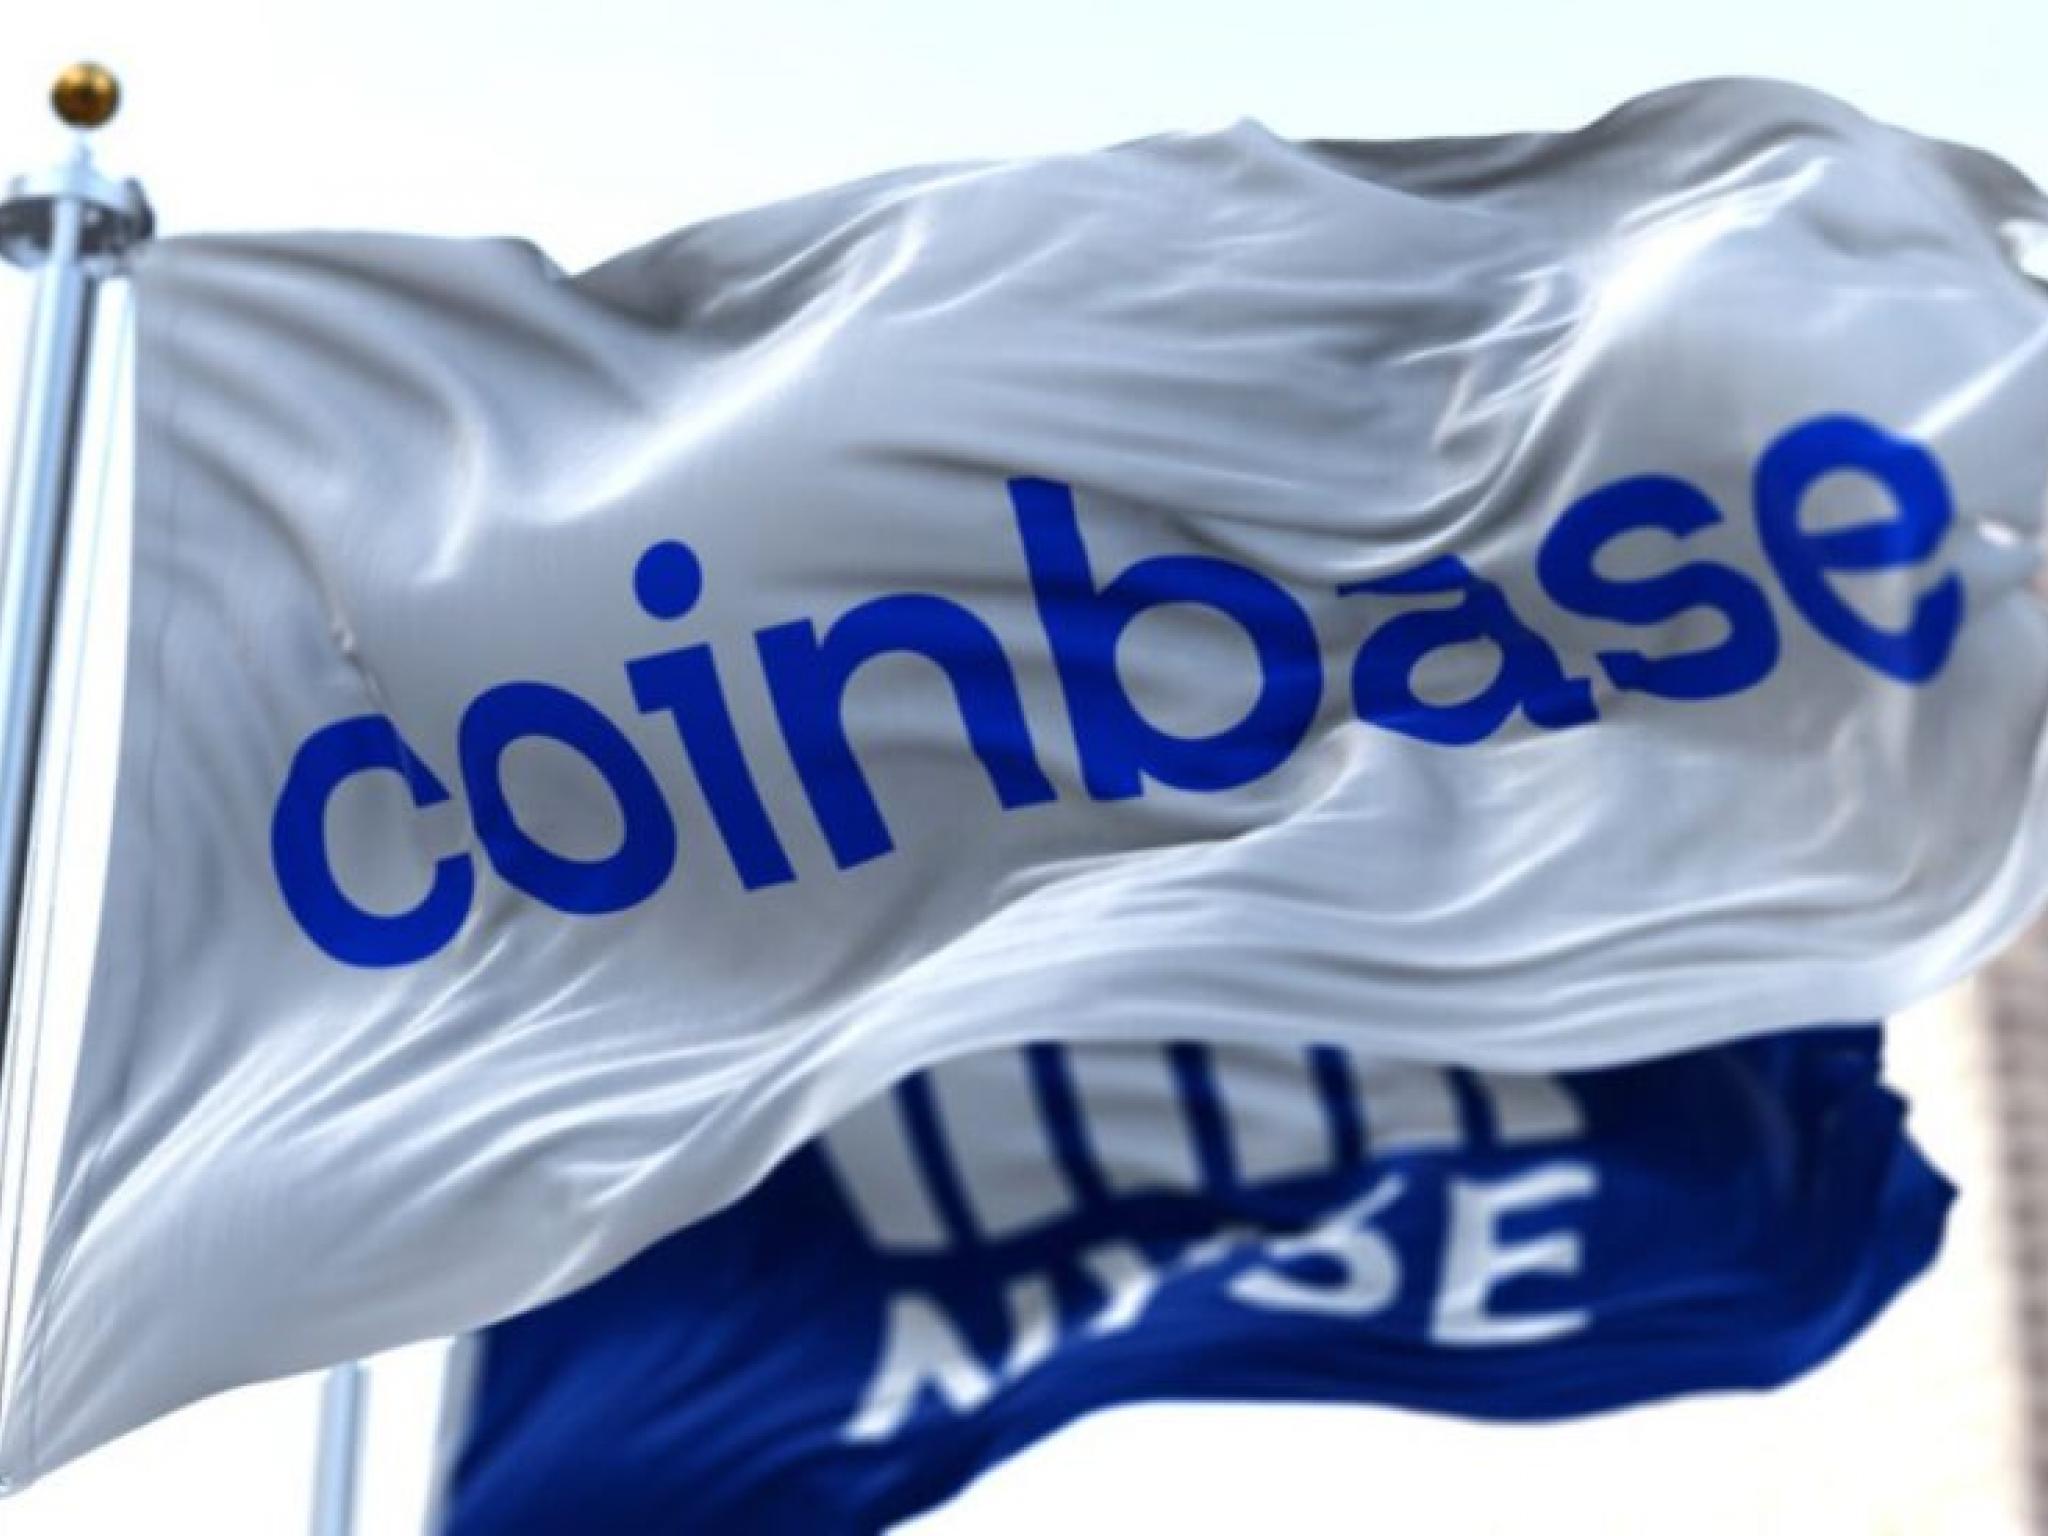  coinbase-up-300-in-a-year-but-faces-bearish-technicals-ahead-of-q1-earnings 